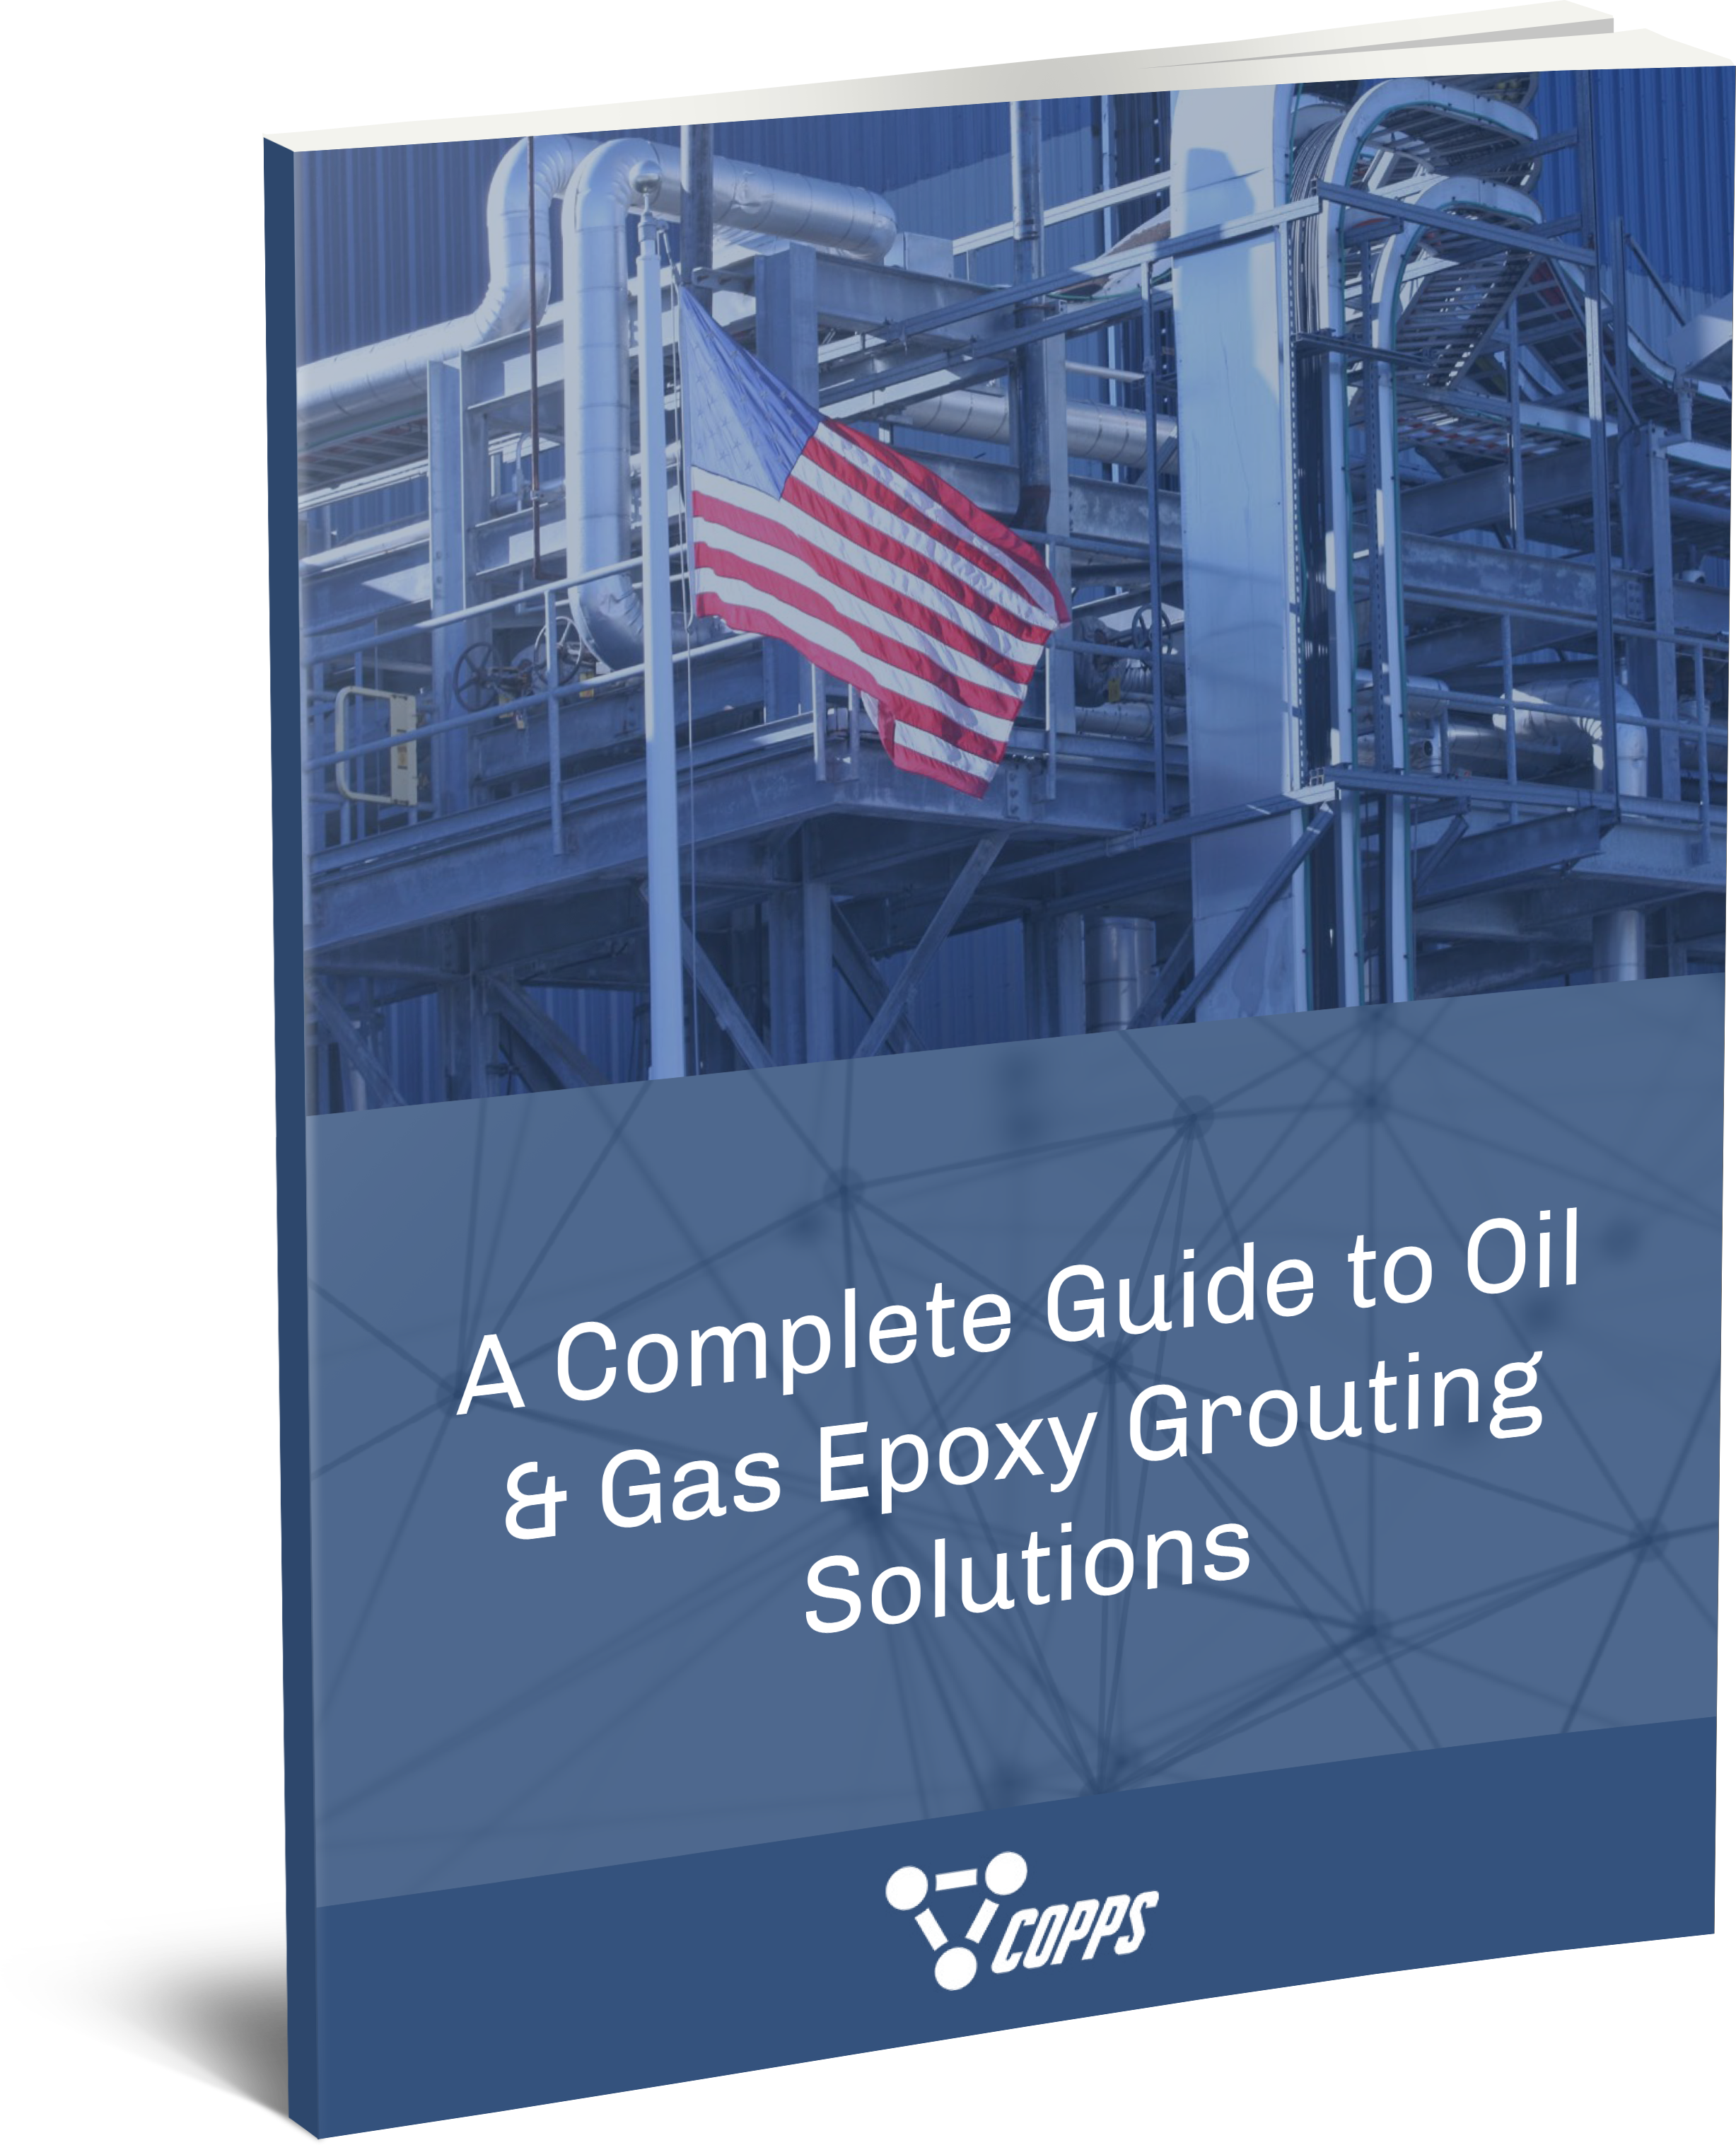 Guide-to-Oil-and-Gas-Epoxy-Grouting-Solutions